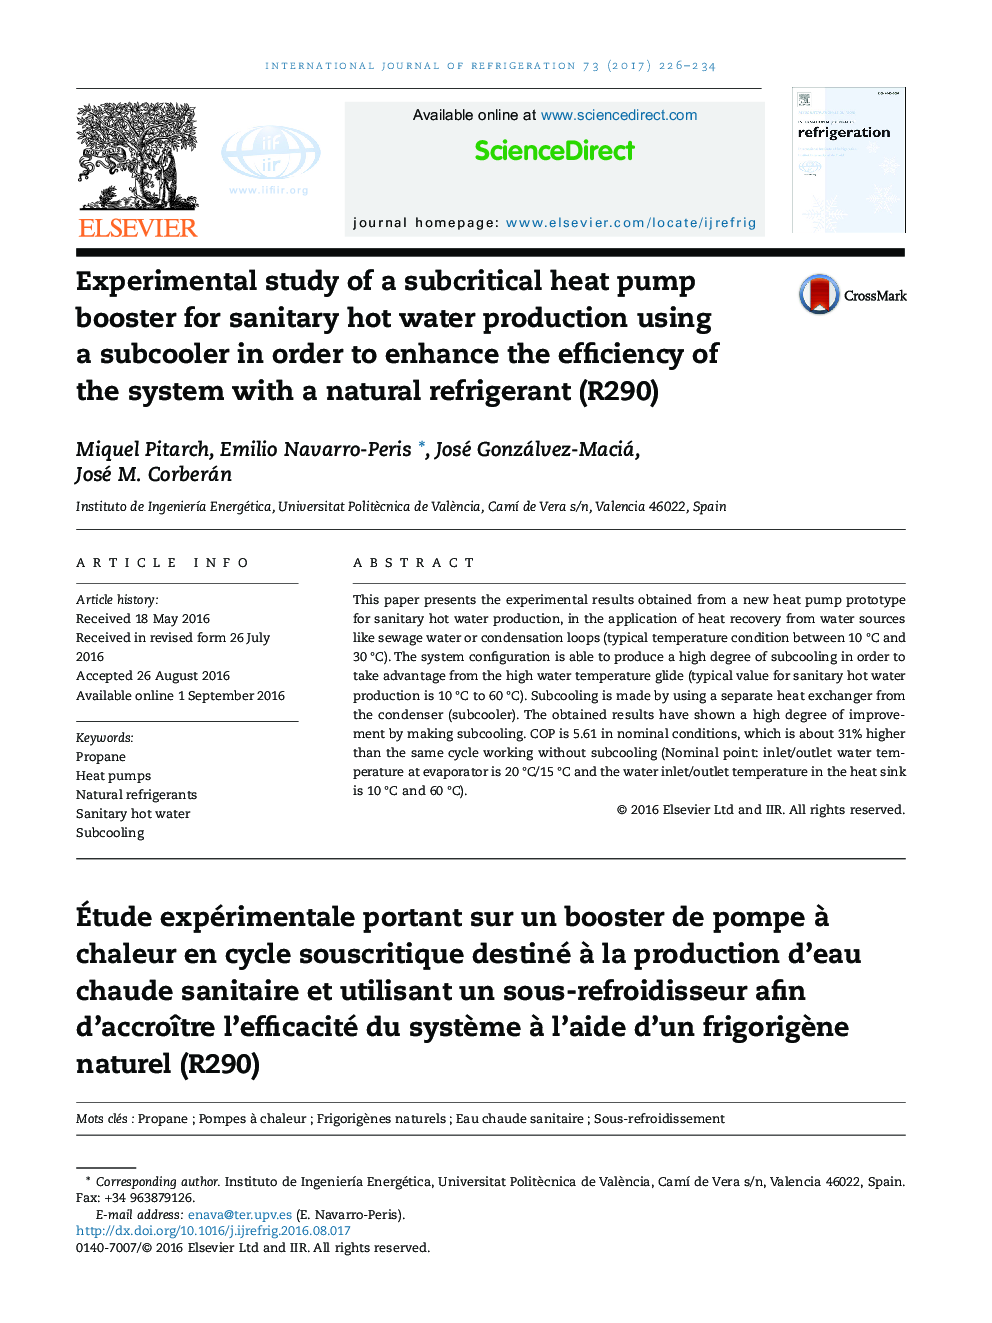 Experimental study of a subcritical heat pump booster for sanitary hot water production using a subcooler in order to enhance the efficiency of the system with a natural refrigerant (R290)